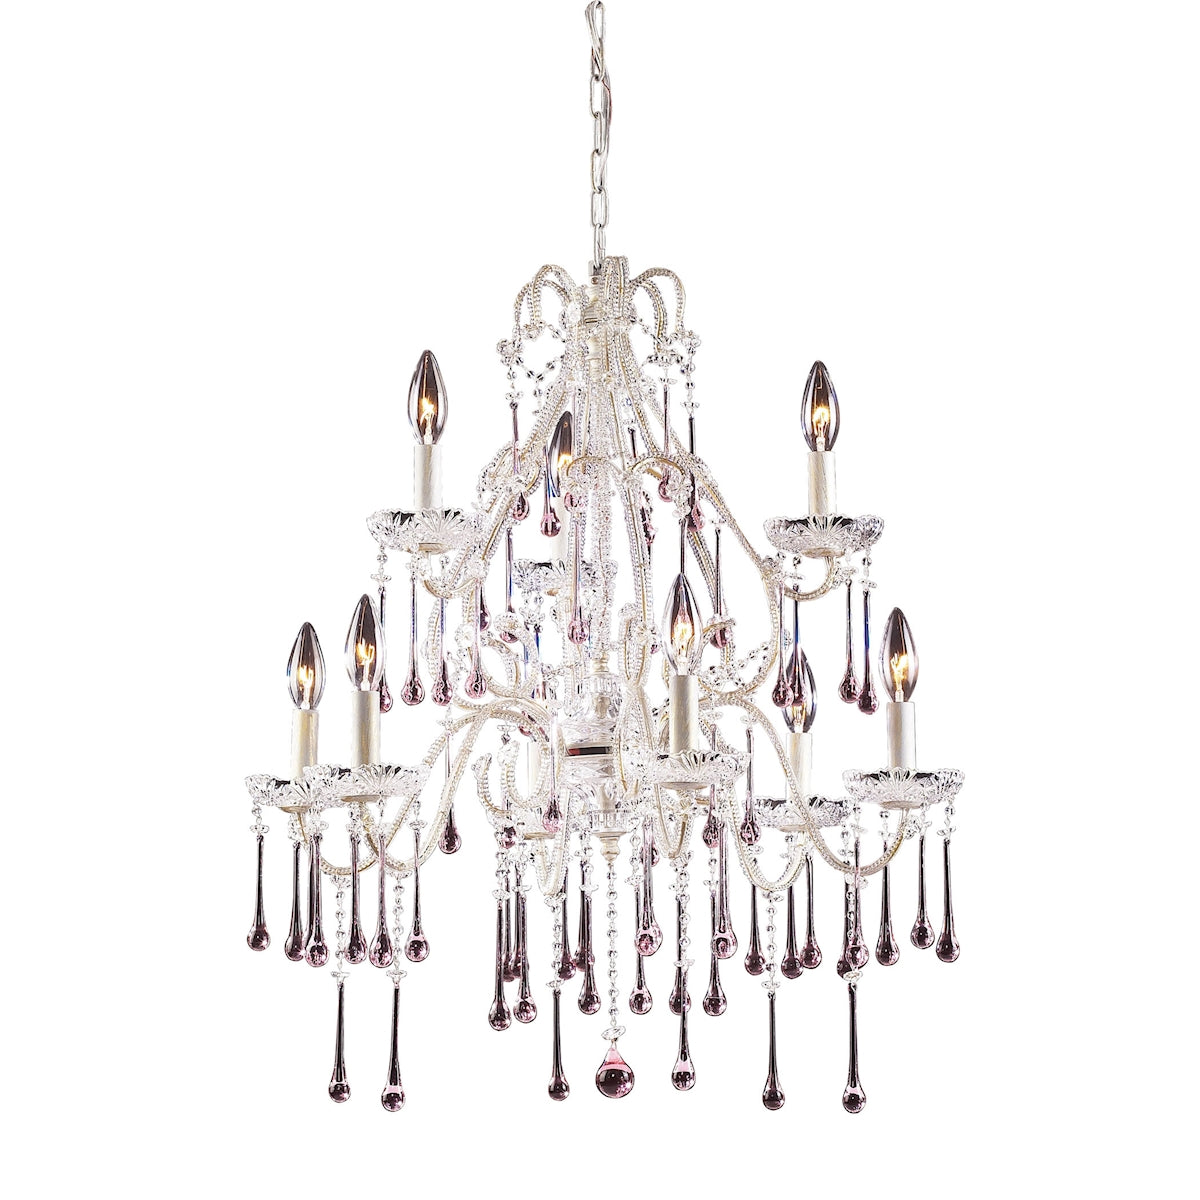 ELK Lighting 4003/6+3RS Opulence 9-Light Chandelier in Antique White with Rose Crystals